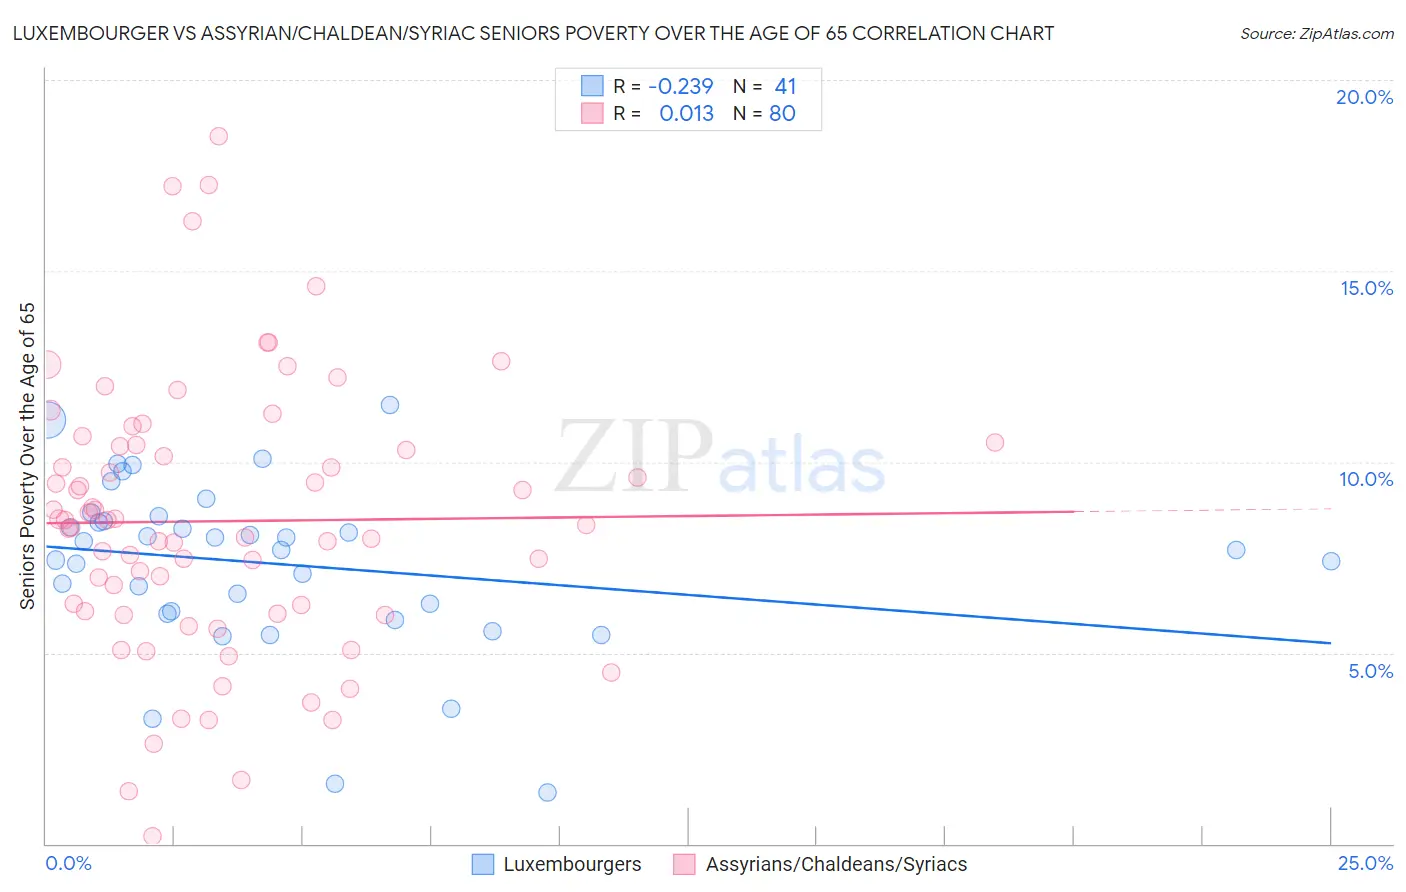 Luxembourger vs Assyrian/Chaldean/Syriac Seniors Poverty Over the Age of 65